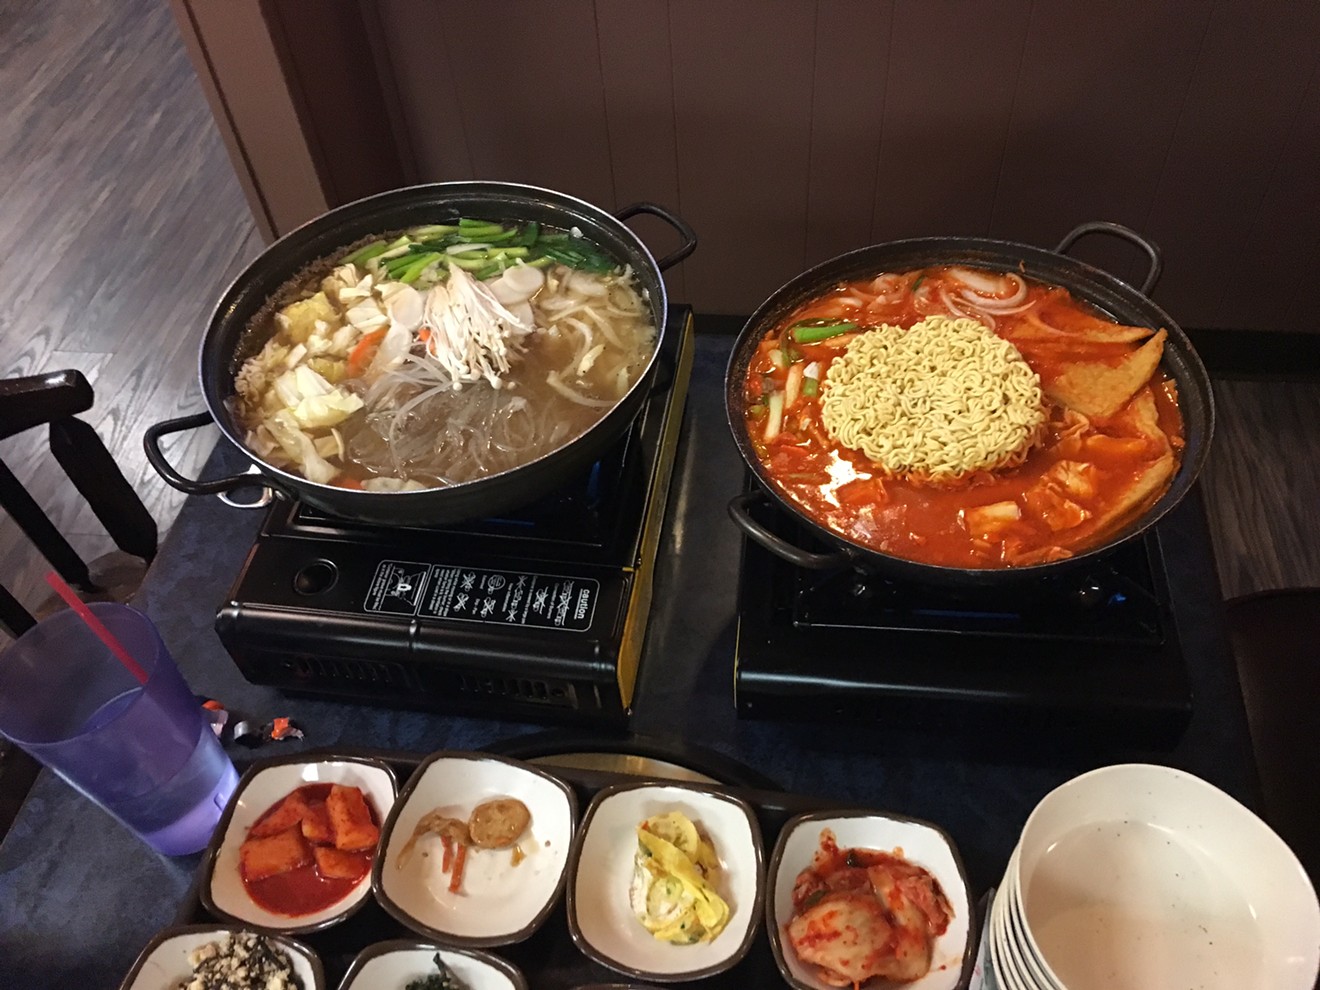 The bulgogi and octopus stew (left) and stir-fried rice cakes are both good orders at Shin Myung Gwan.